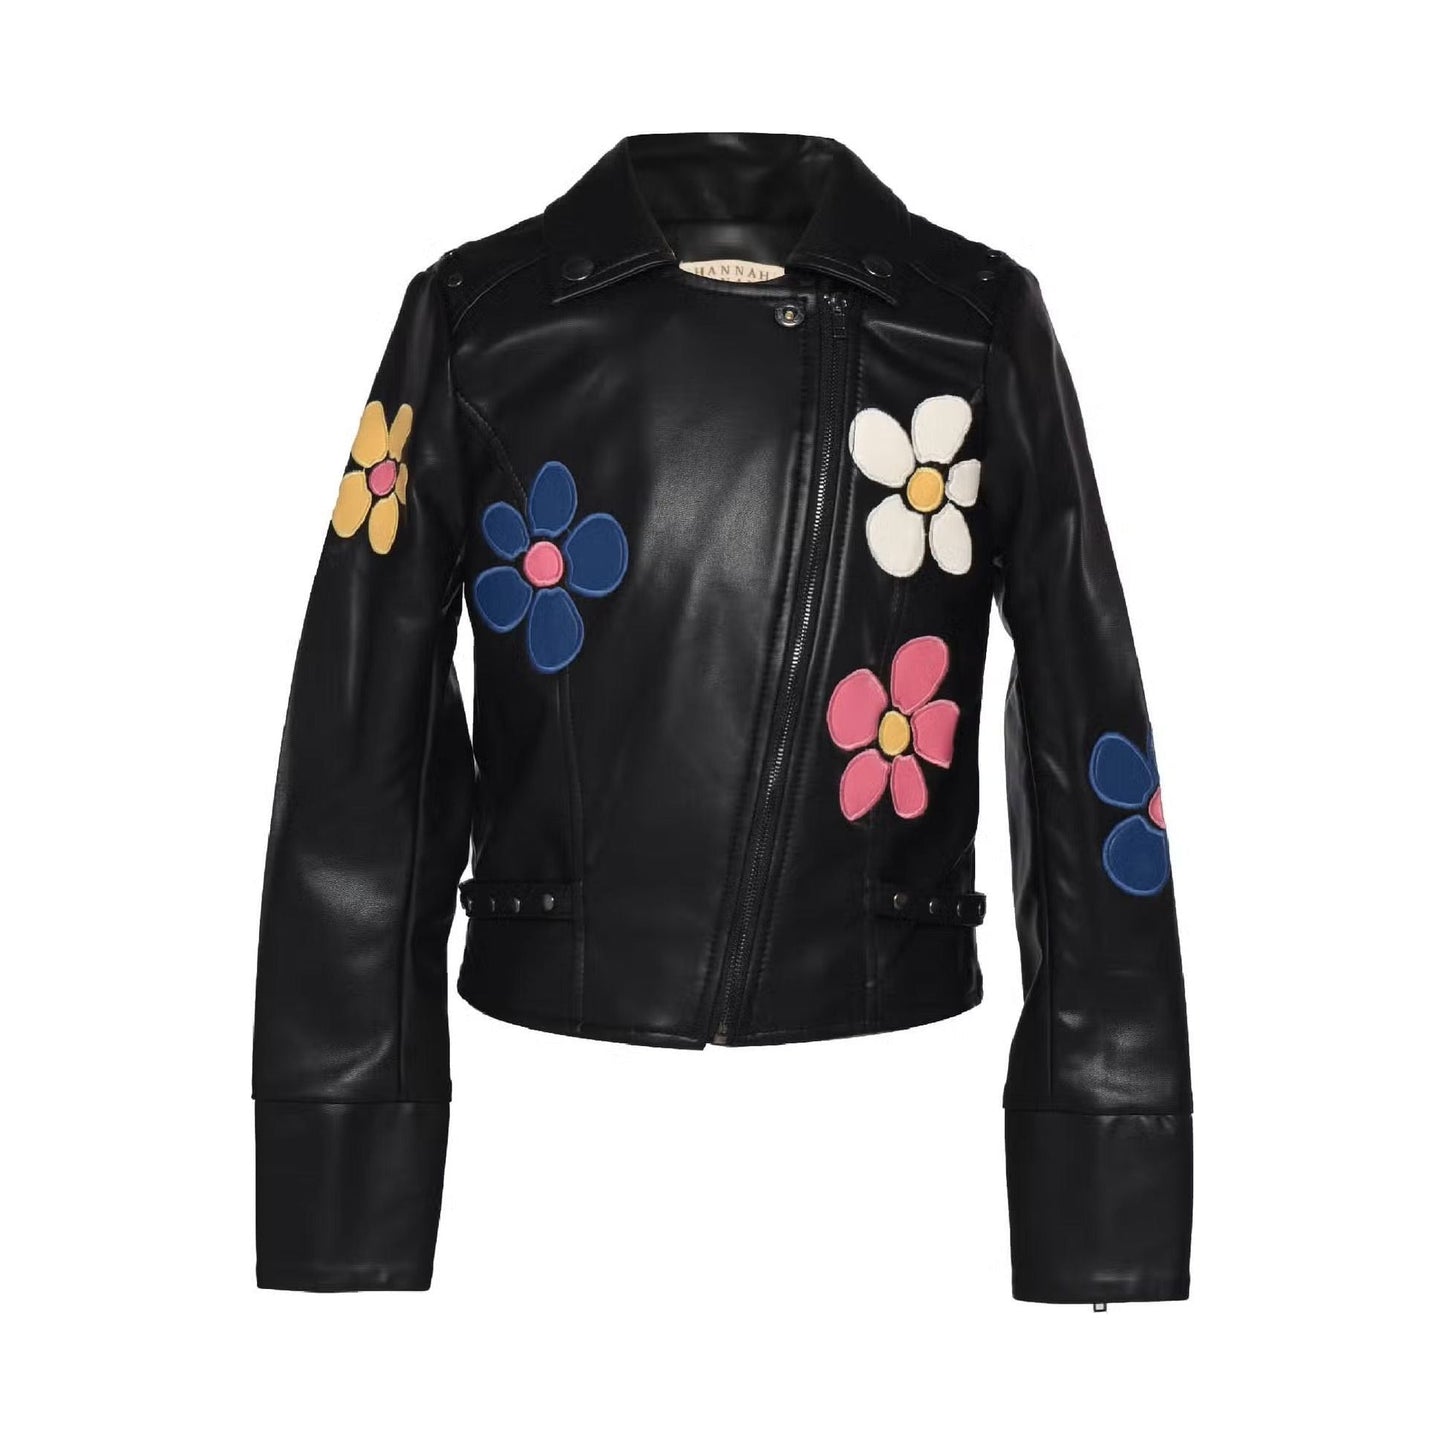 Hannah Banana Girl's Faux Leather Floral-Patched Jacket